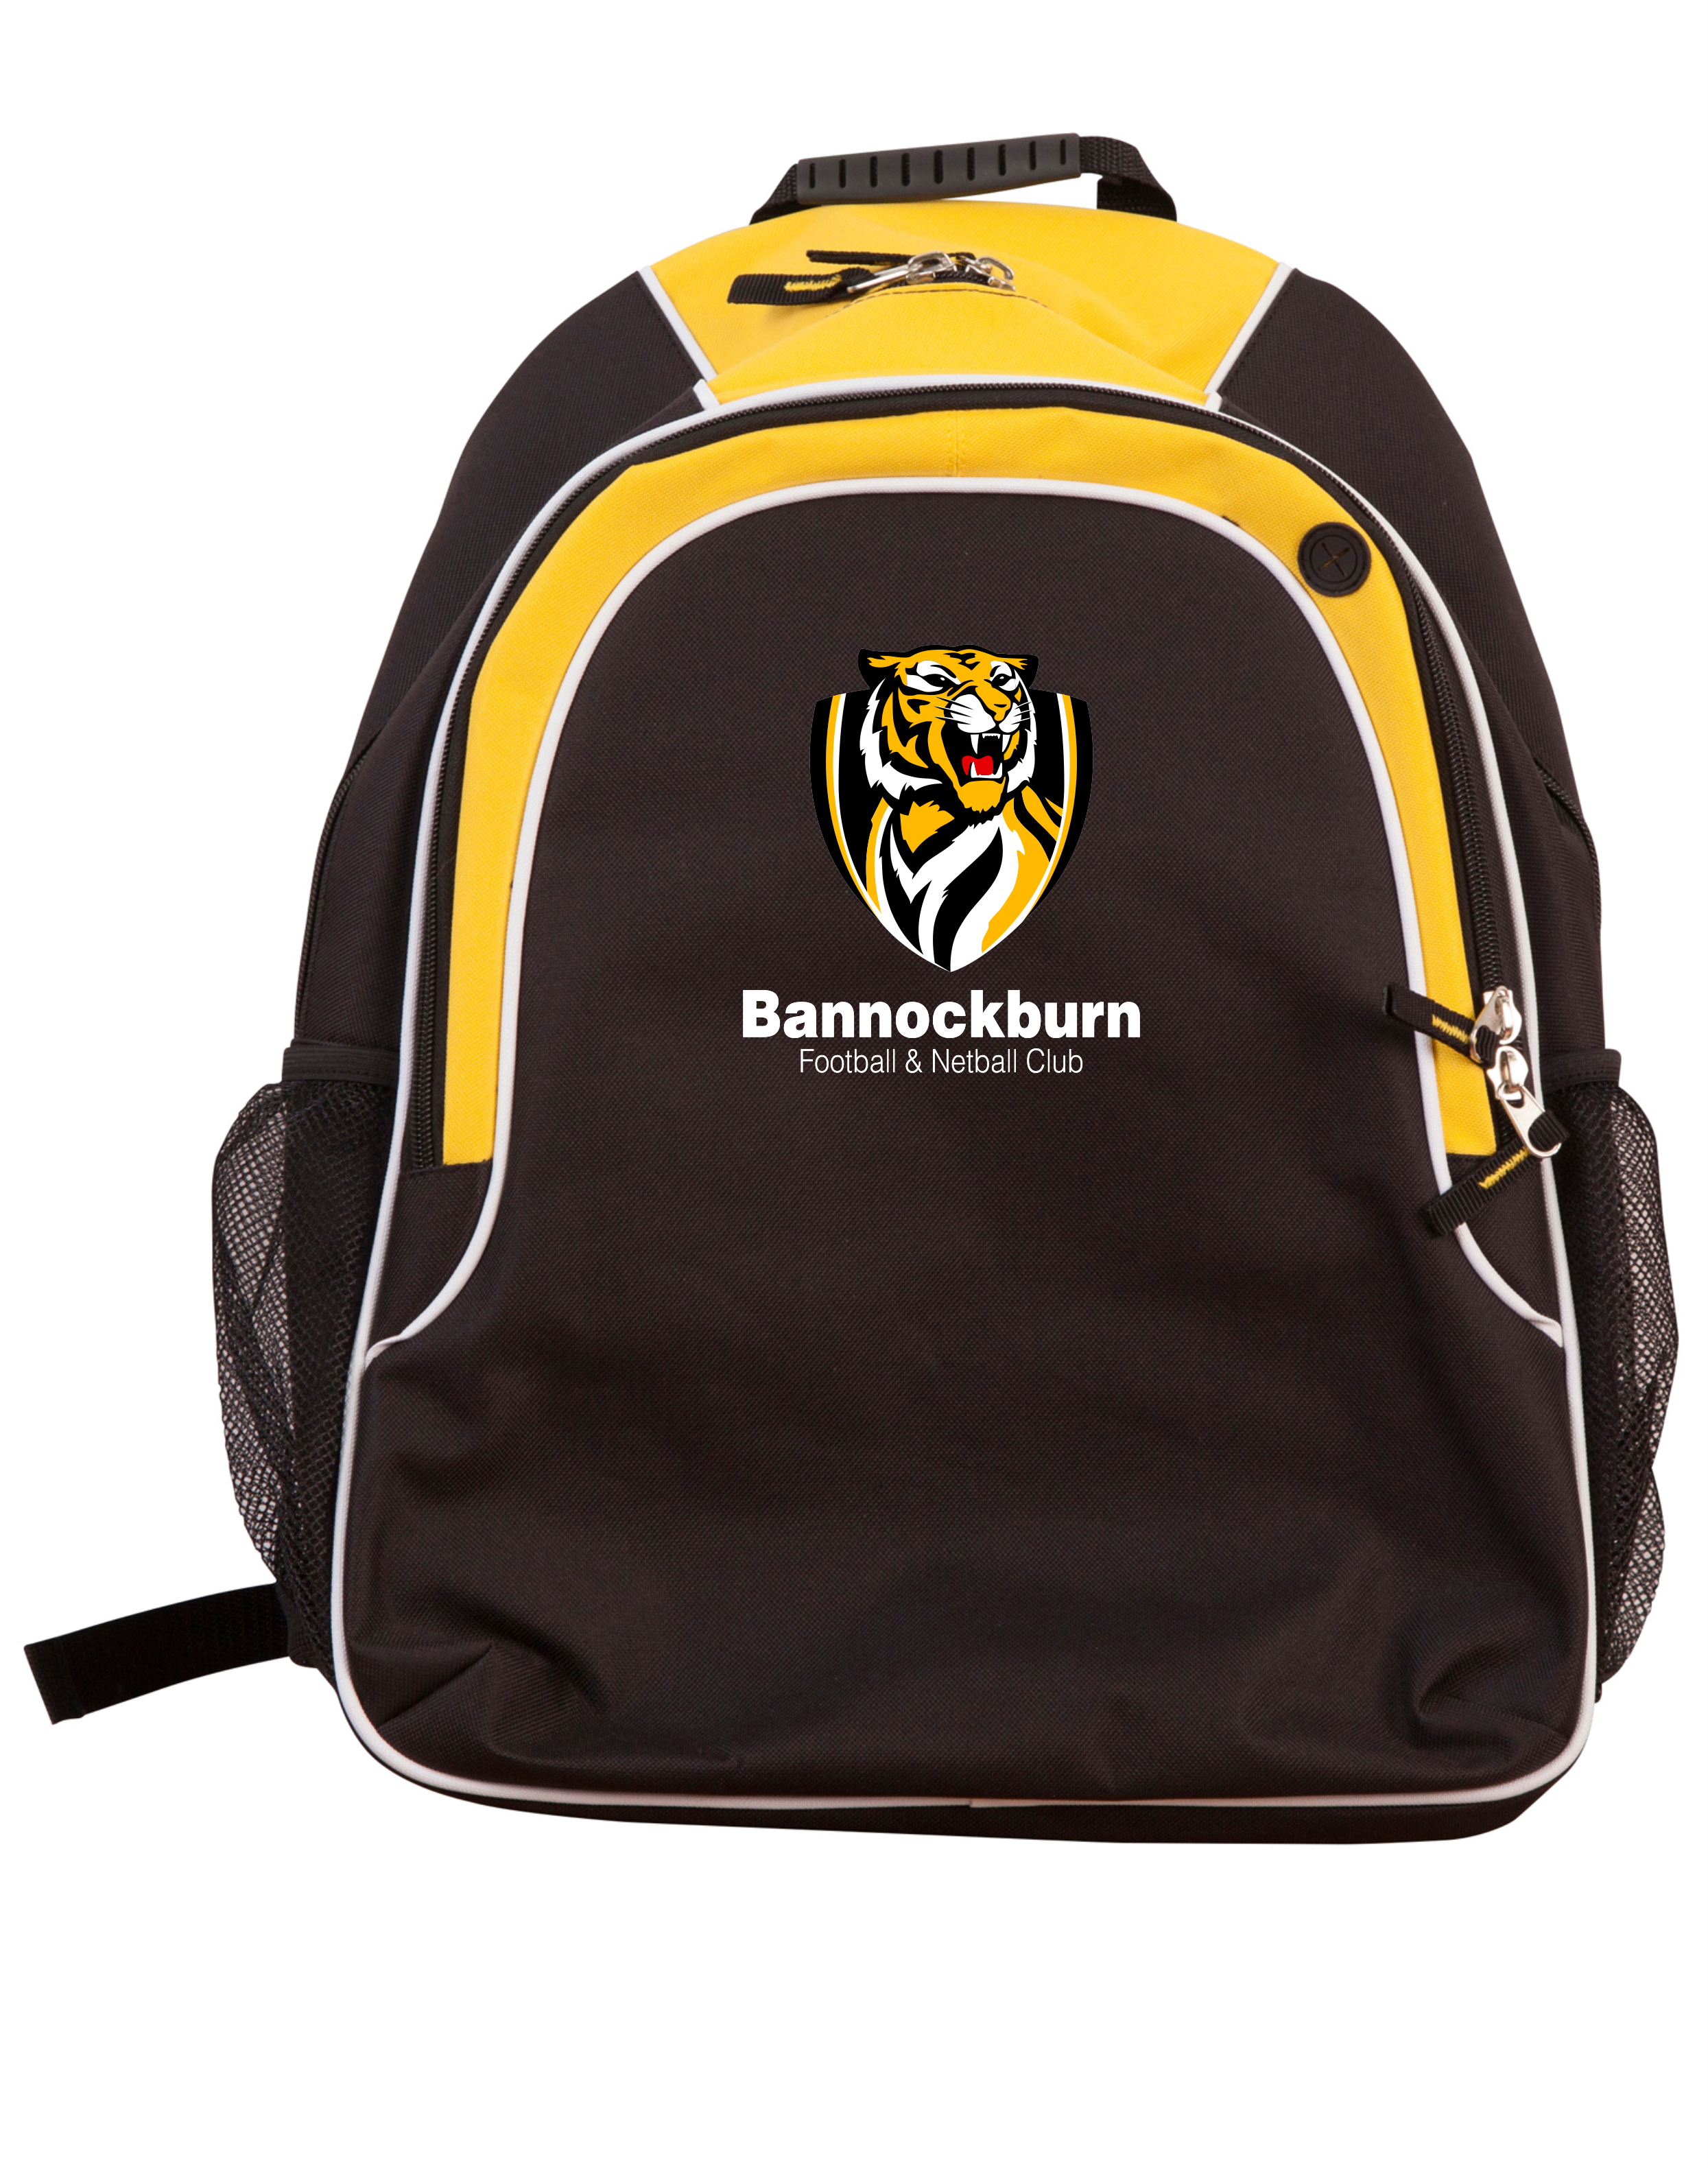 Back Pack in Black/Yellow